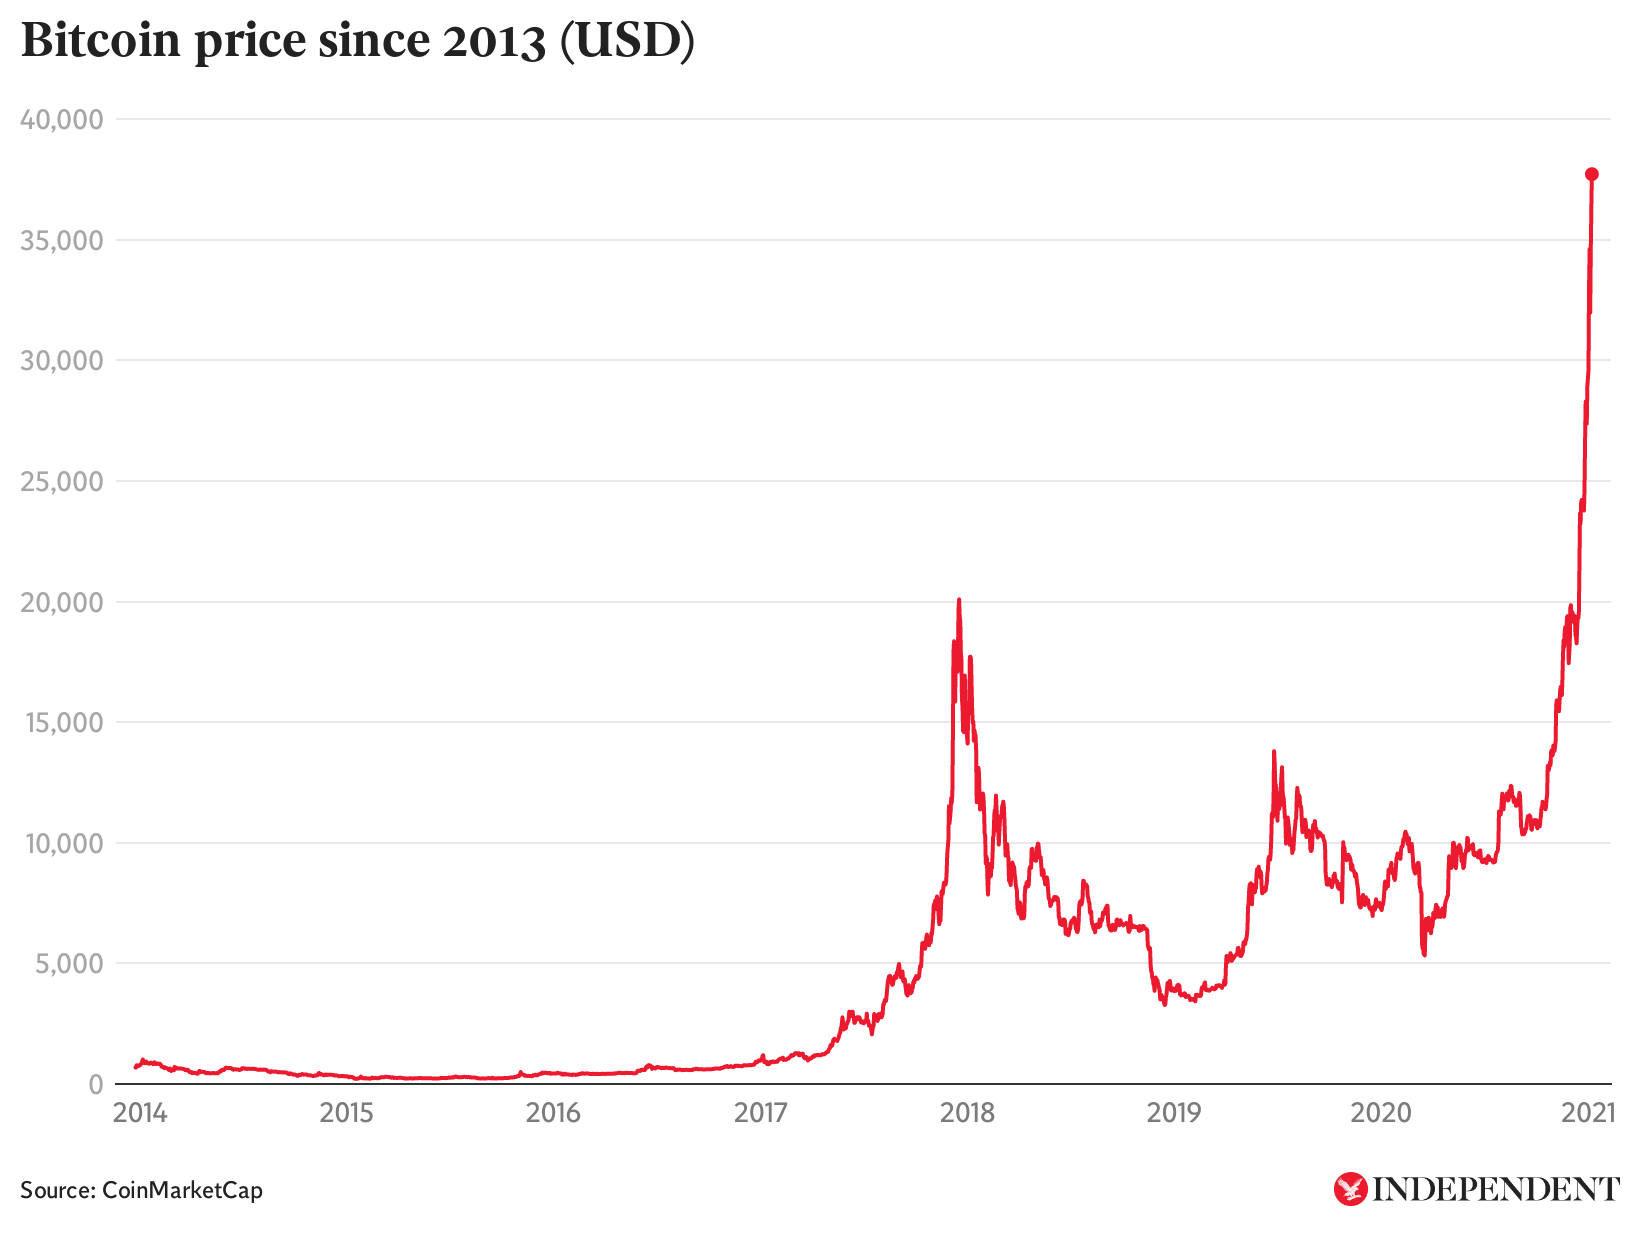 How bitcoin’s fortunes have fared since 2013